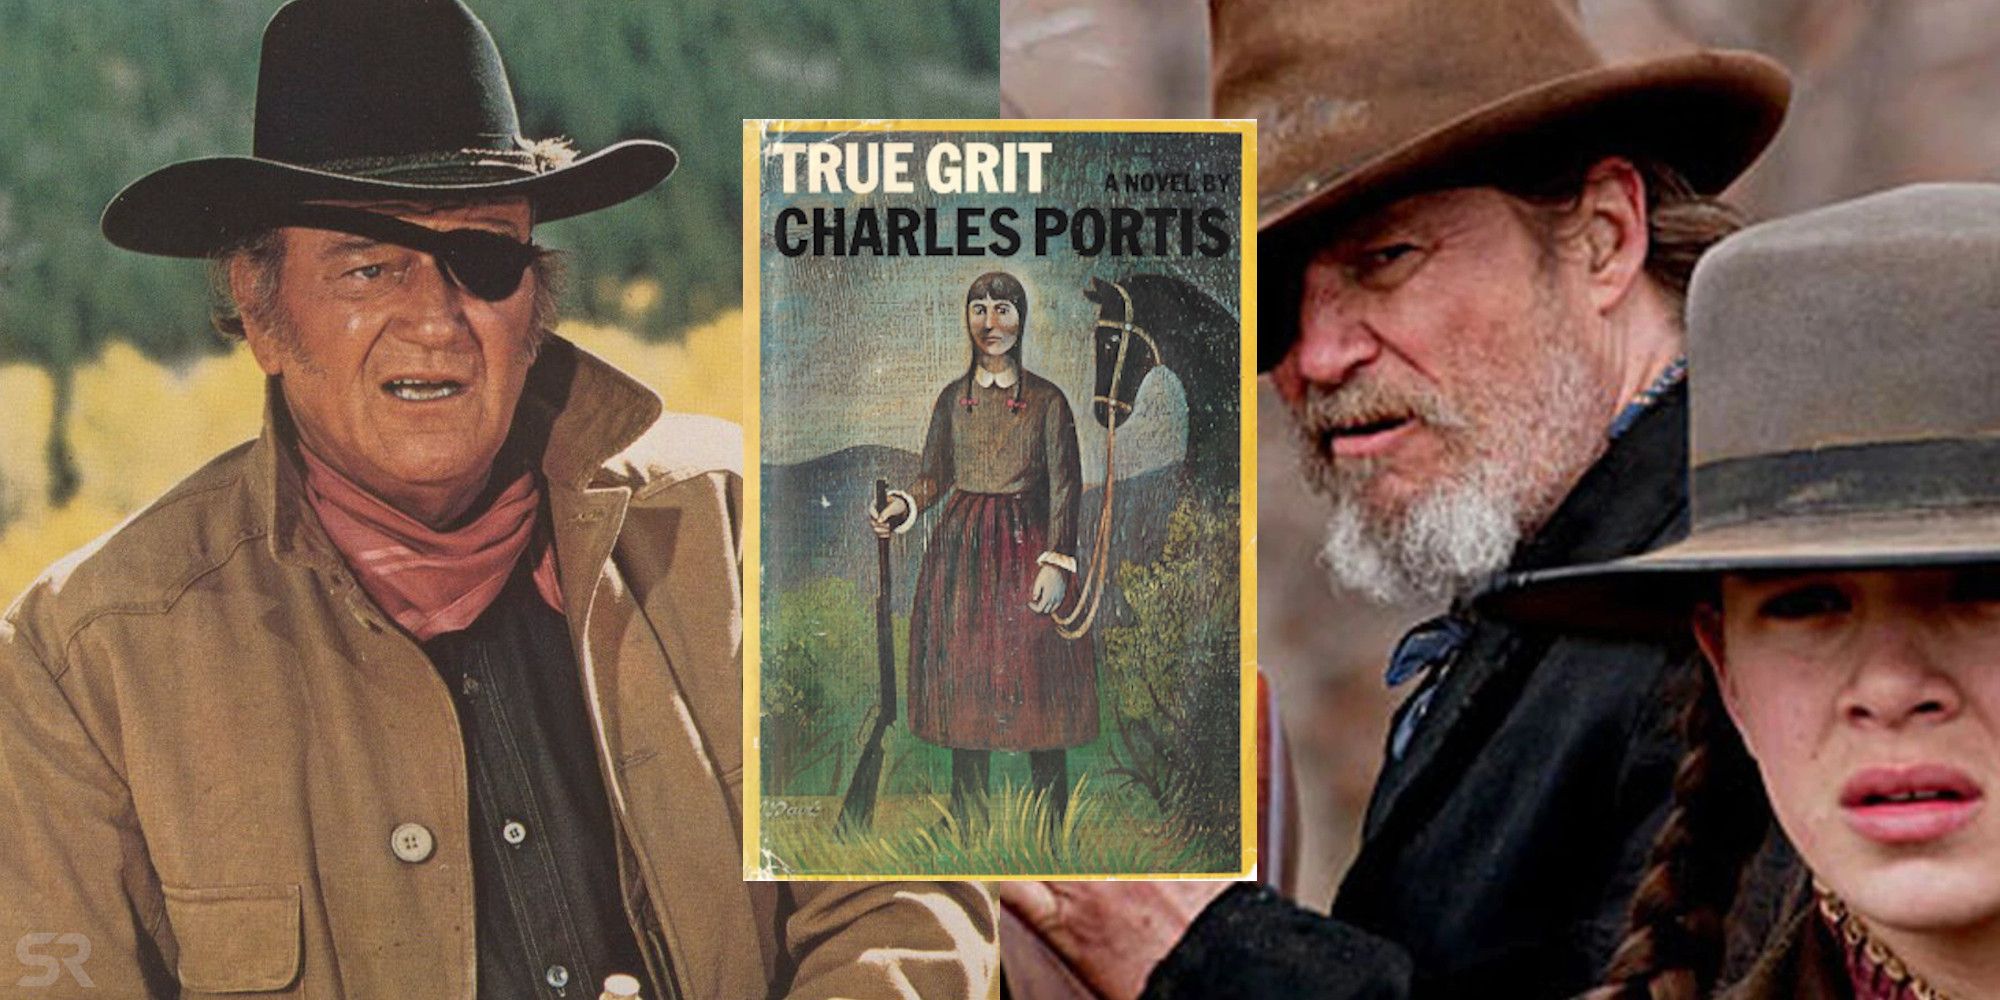 True Grit How The 2010 Movie Compares To The Book & John Wayne Version